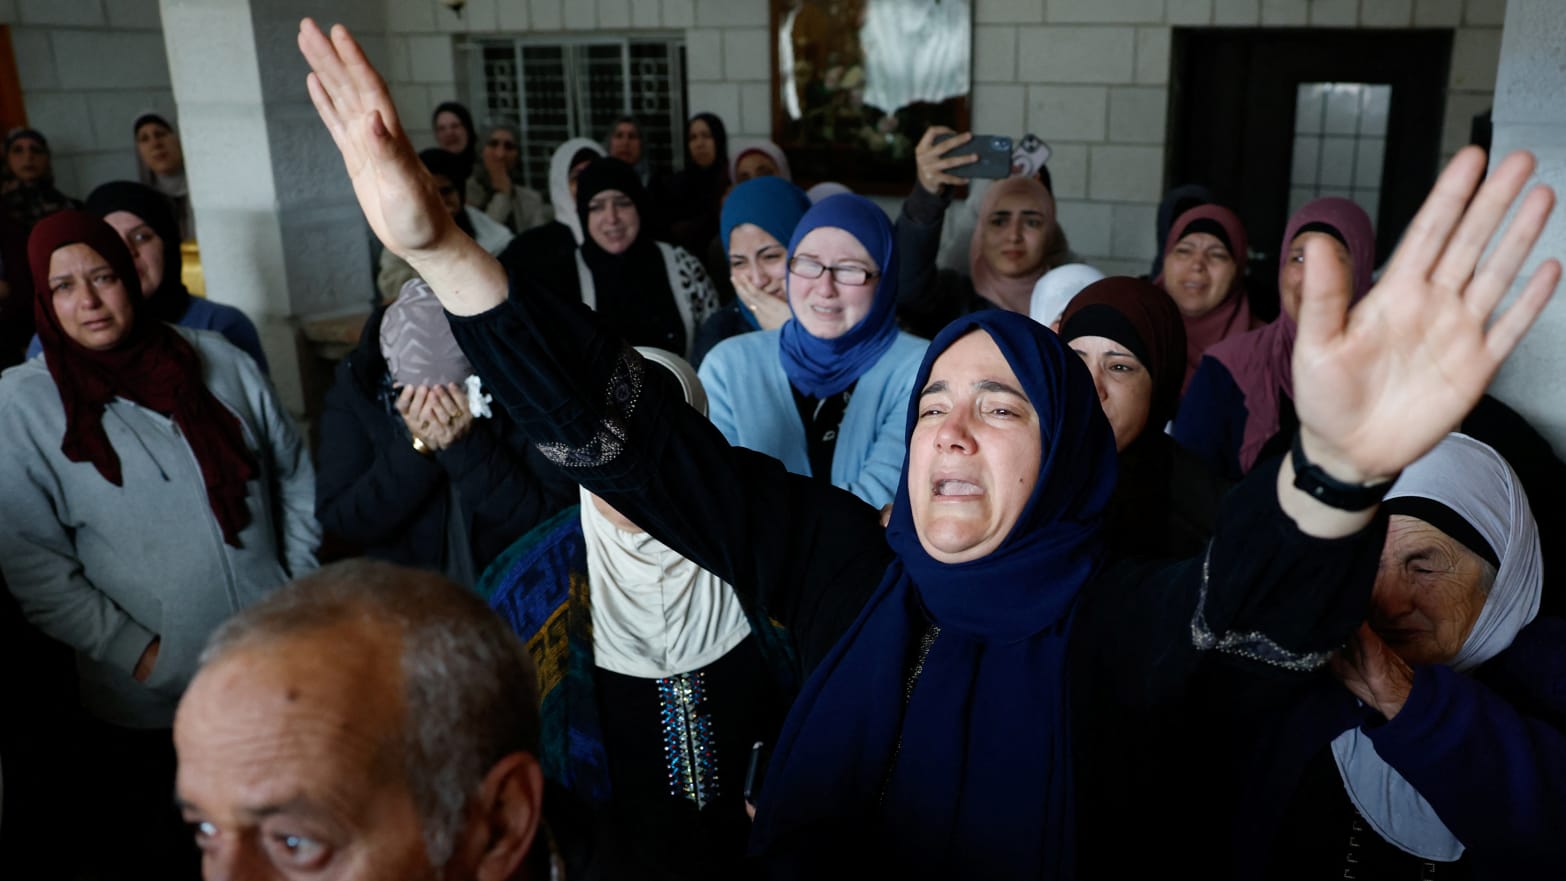 Mourners react during the funeral of American-Palestinian Tawfiq Ajaq, 17, who Palestinian officials say was killed by the Israeli security forces in the West Bank.